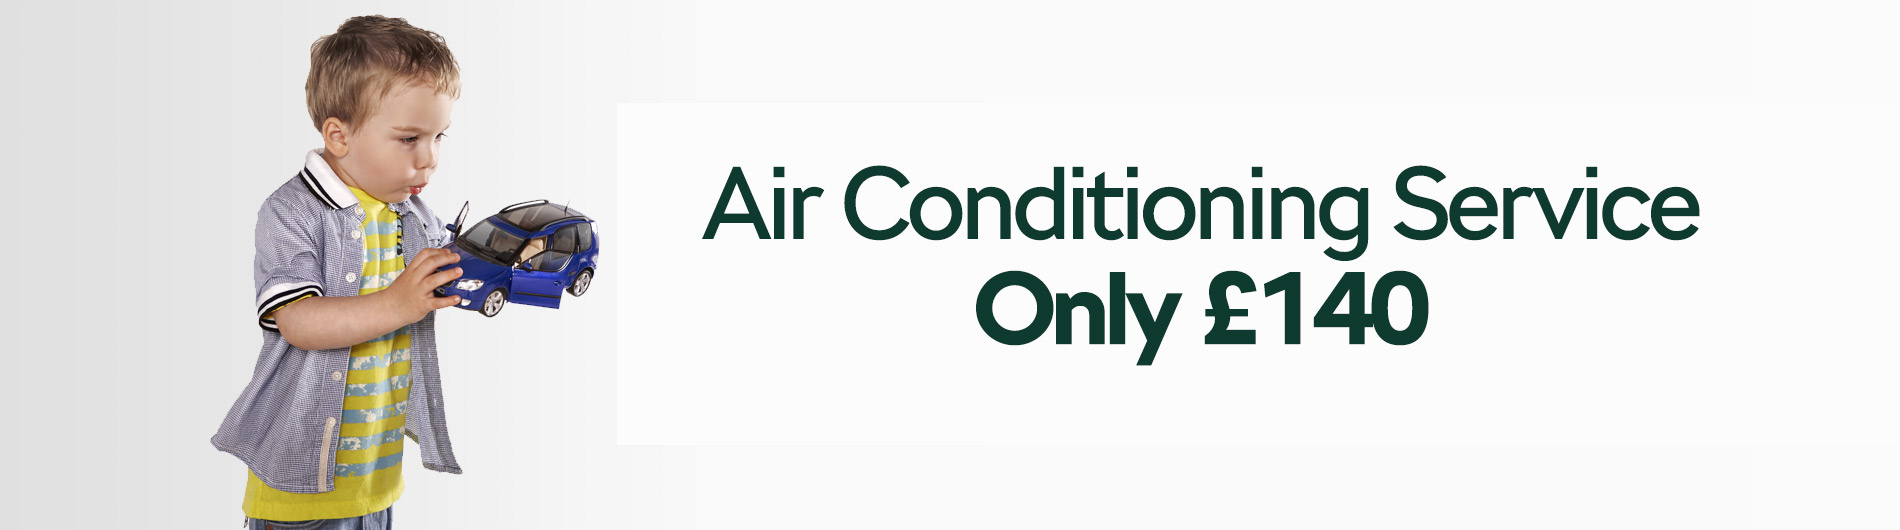 Air Conditioning Offer	